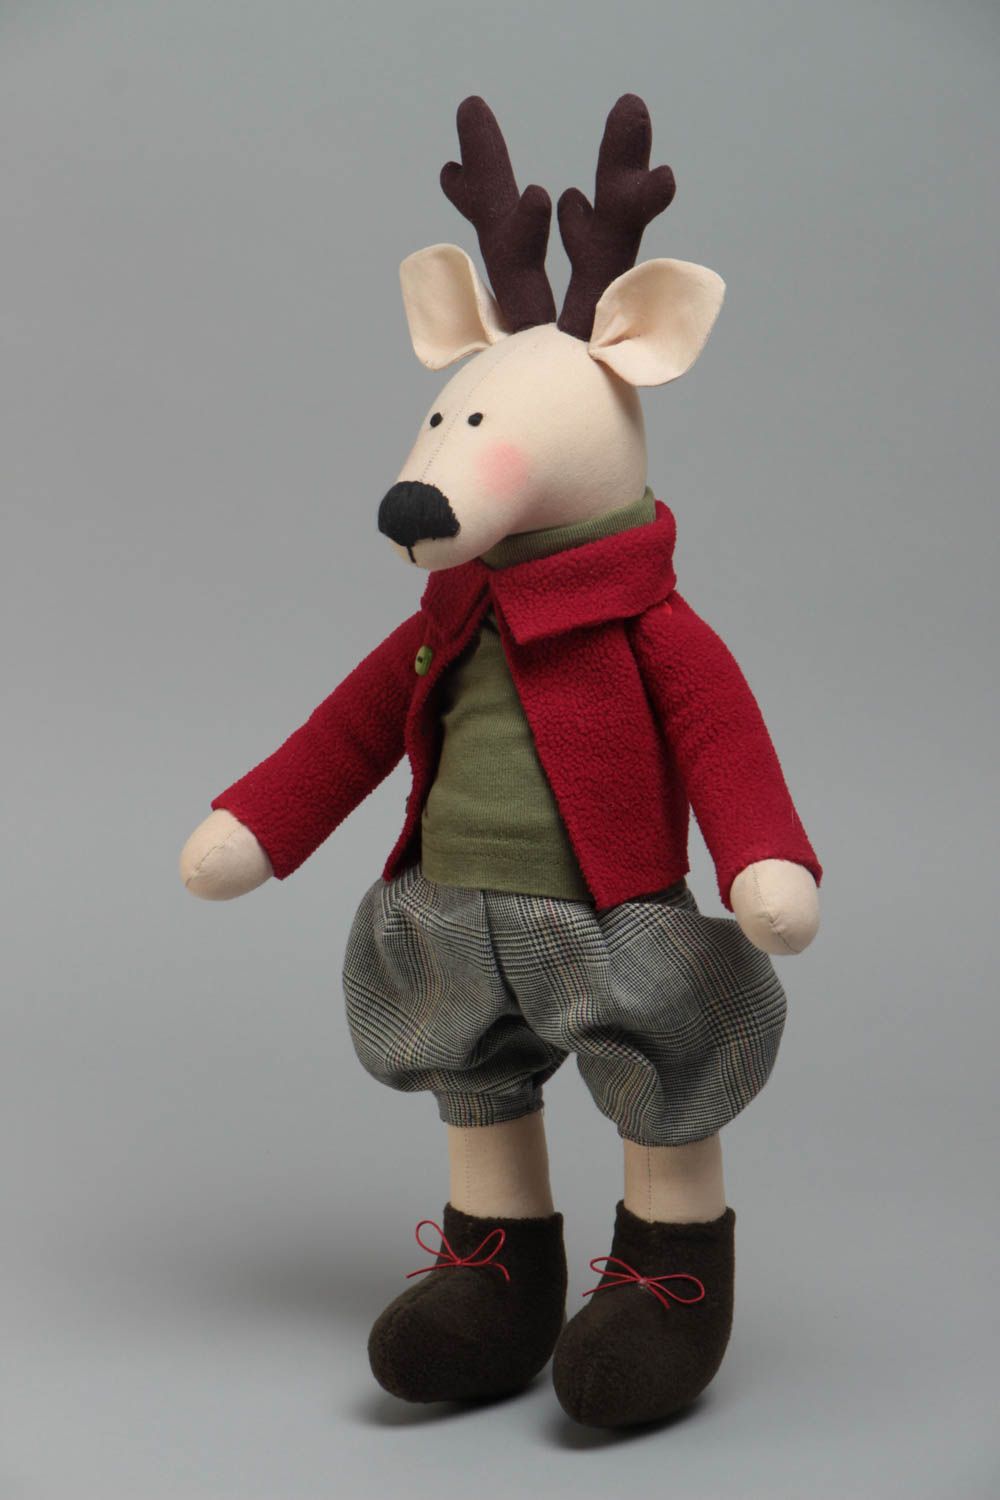 Handmade designer fabric soft toy Deer in red jacket for kids and interior decor photo 2